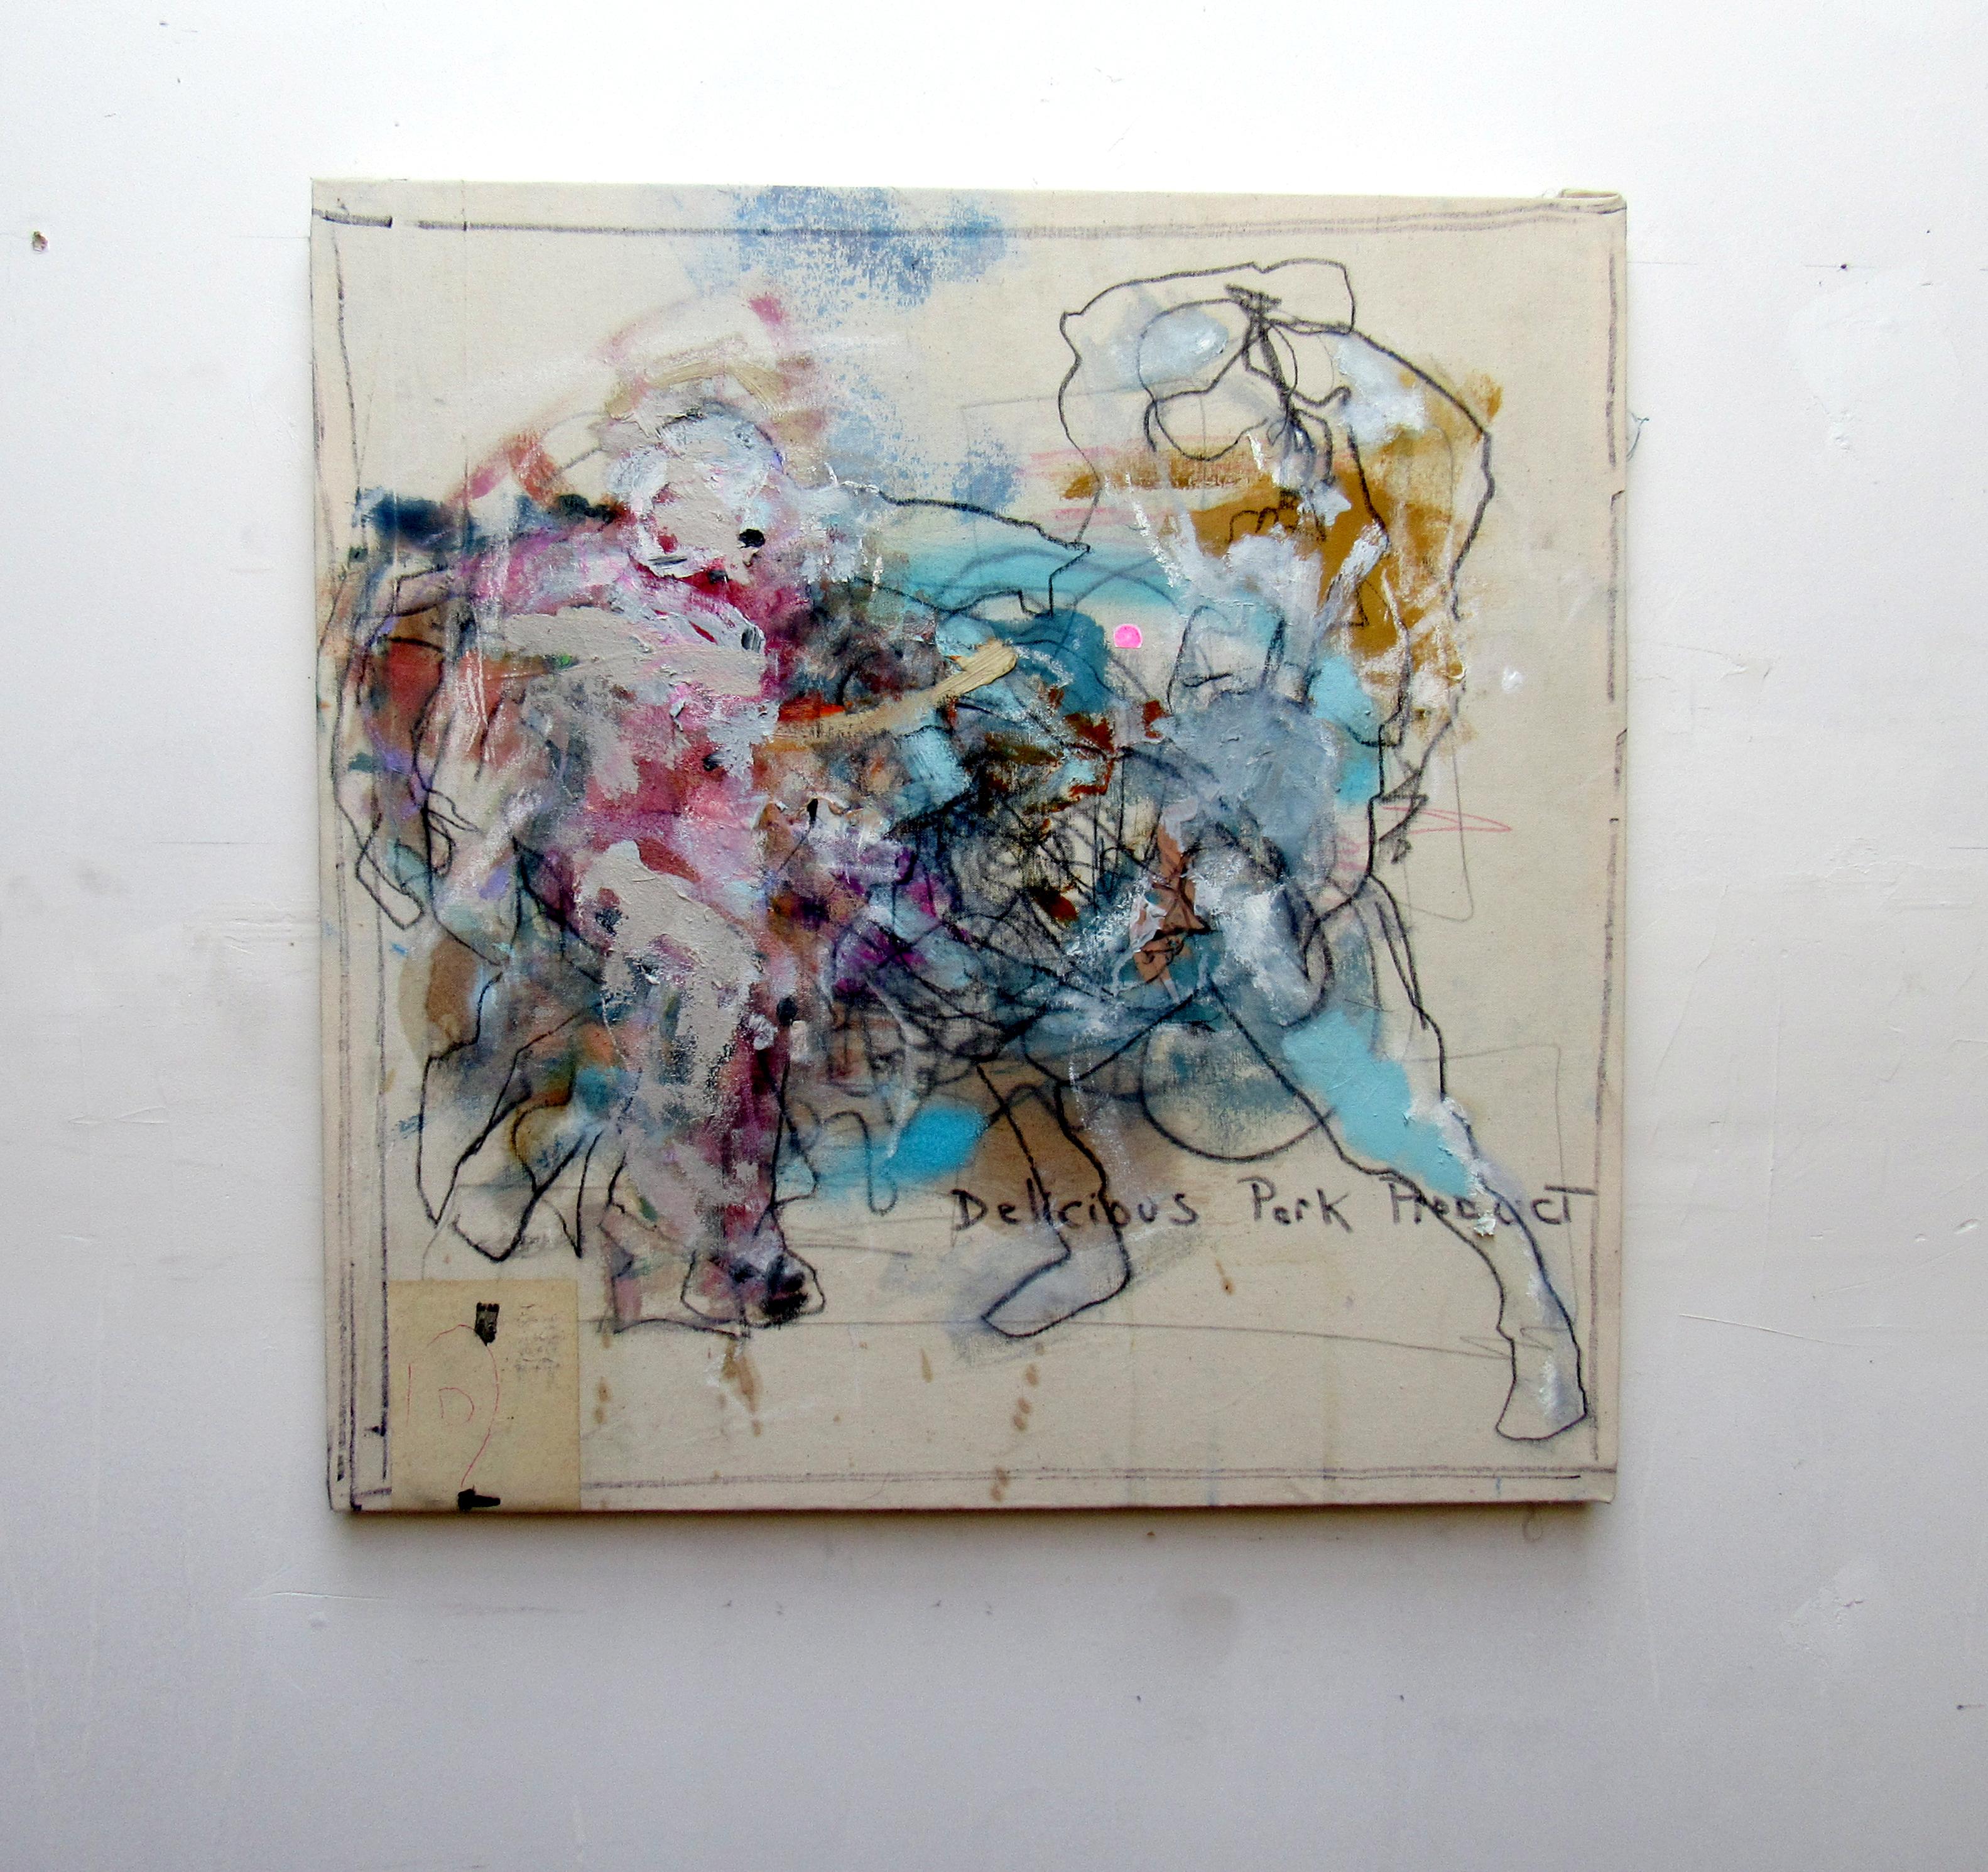 Porkparty, gestural abstraction w figure, energy, blue and neutral tones - Painting by C. Dimitri